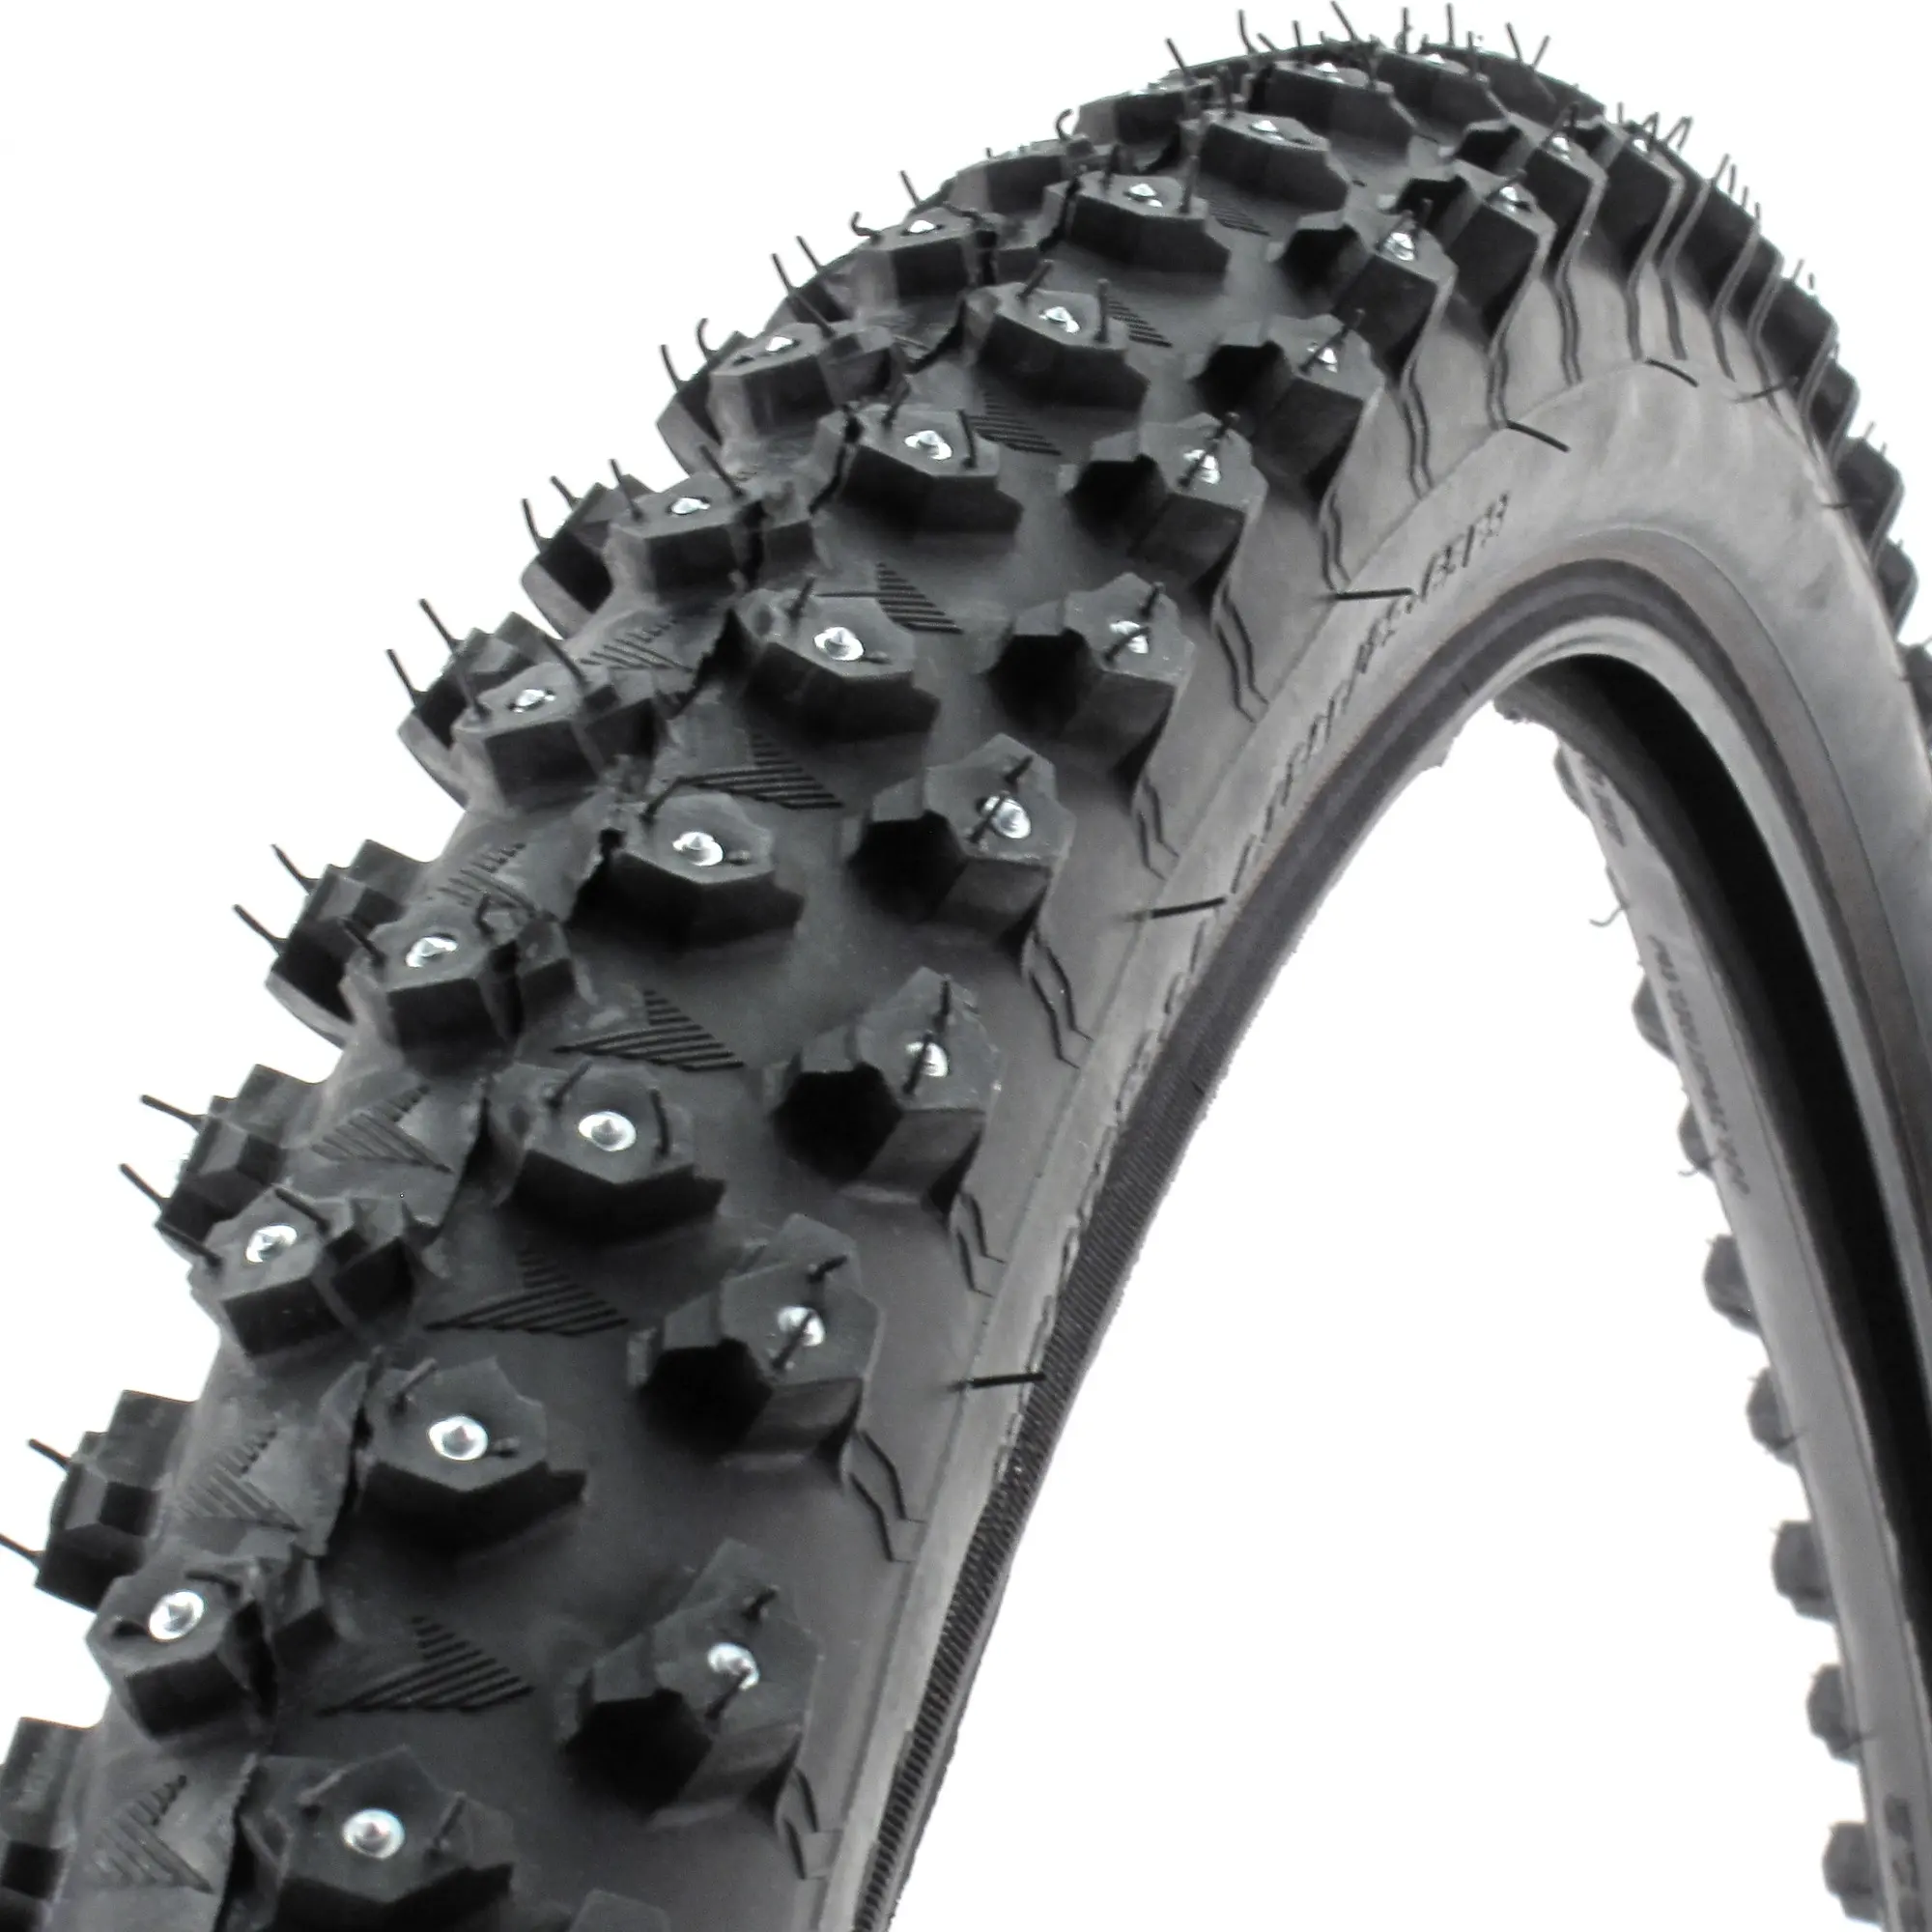 Studded Winter eBike Tire 20x4 26x4 Fat Bicycle Tyre Factory Ice Studded bike tires High Quality Bicycle Fat 20x4.0 26x4.0